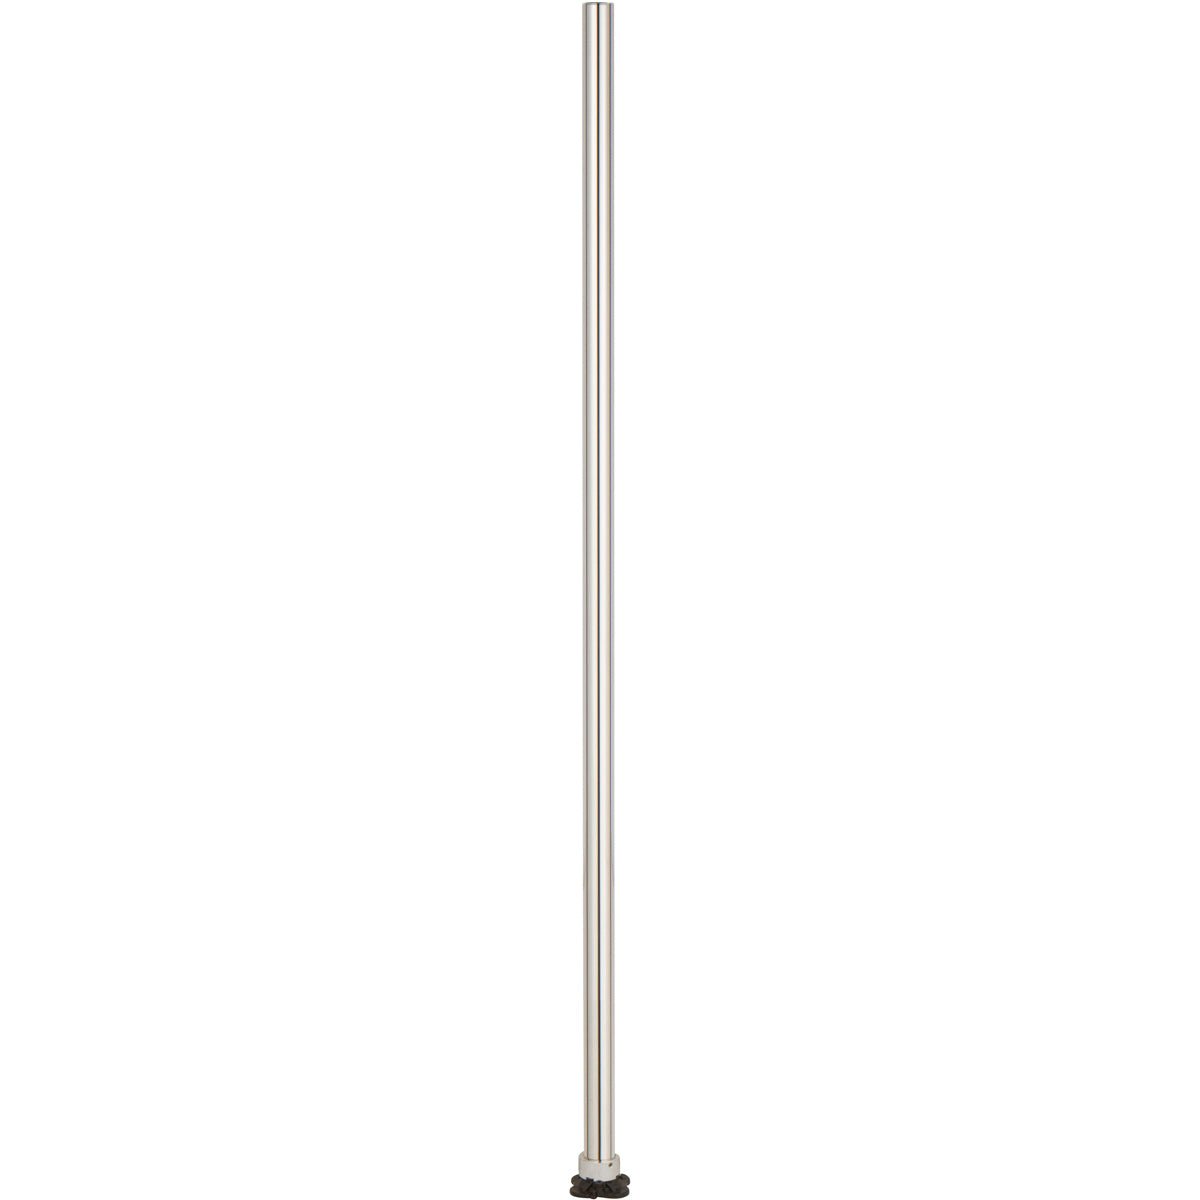 Removable Rotator Stainless Dance Pole - LIL MYNX